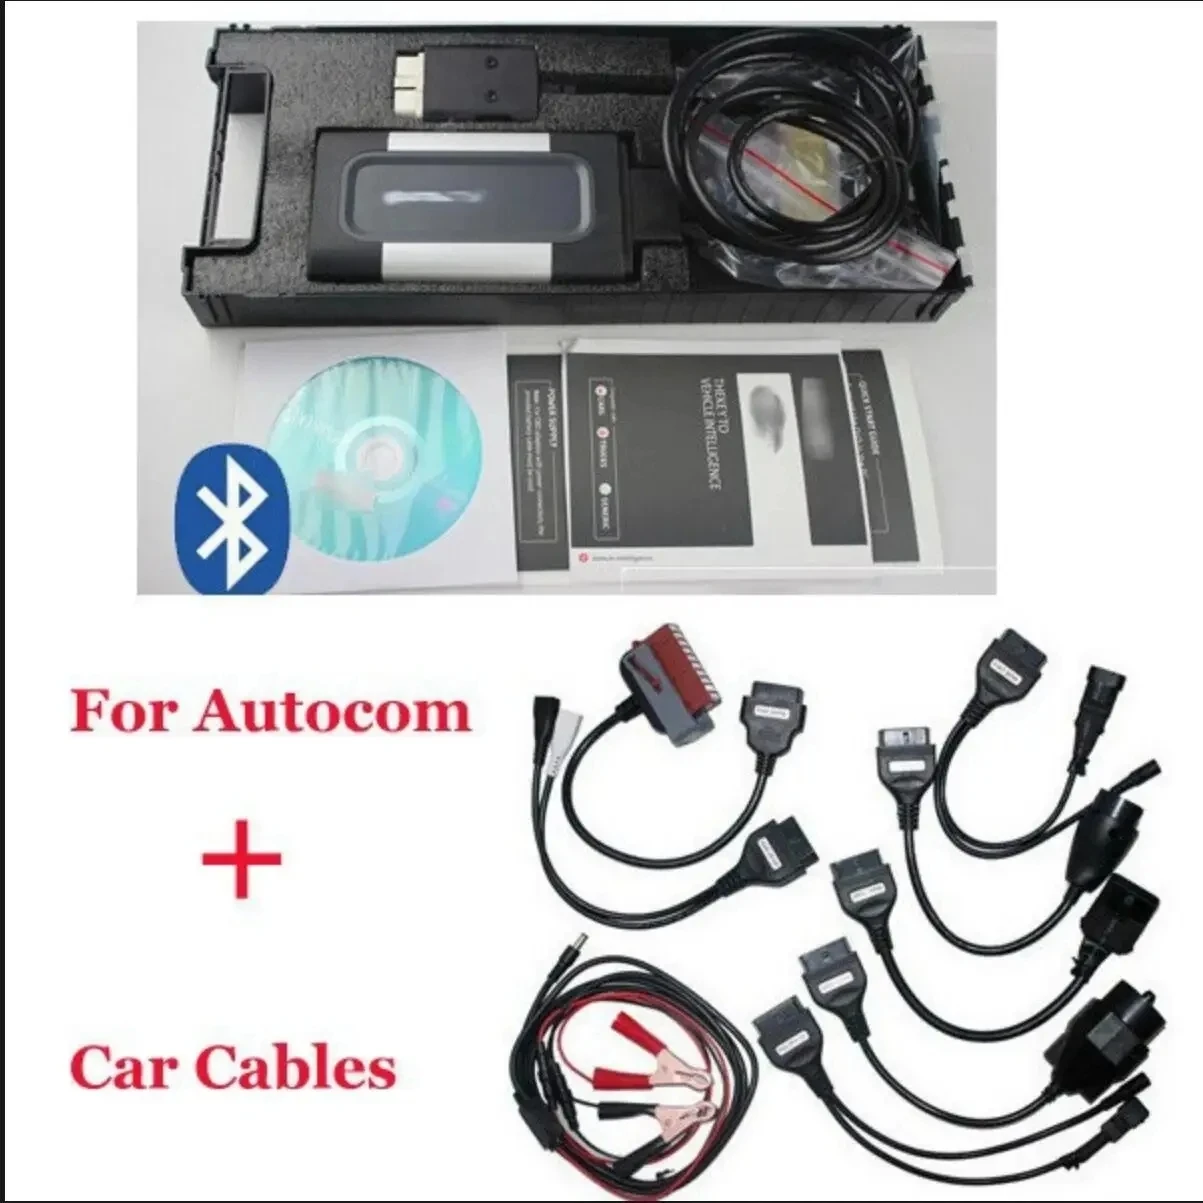 

2024 Quality A AUTOCOM CDP Pro For Cars & Trucks(Compact Diagnostic Partner) OKI CHIP With Free Shipping,Full Set Car Cables